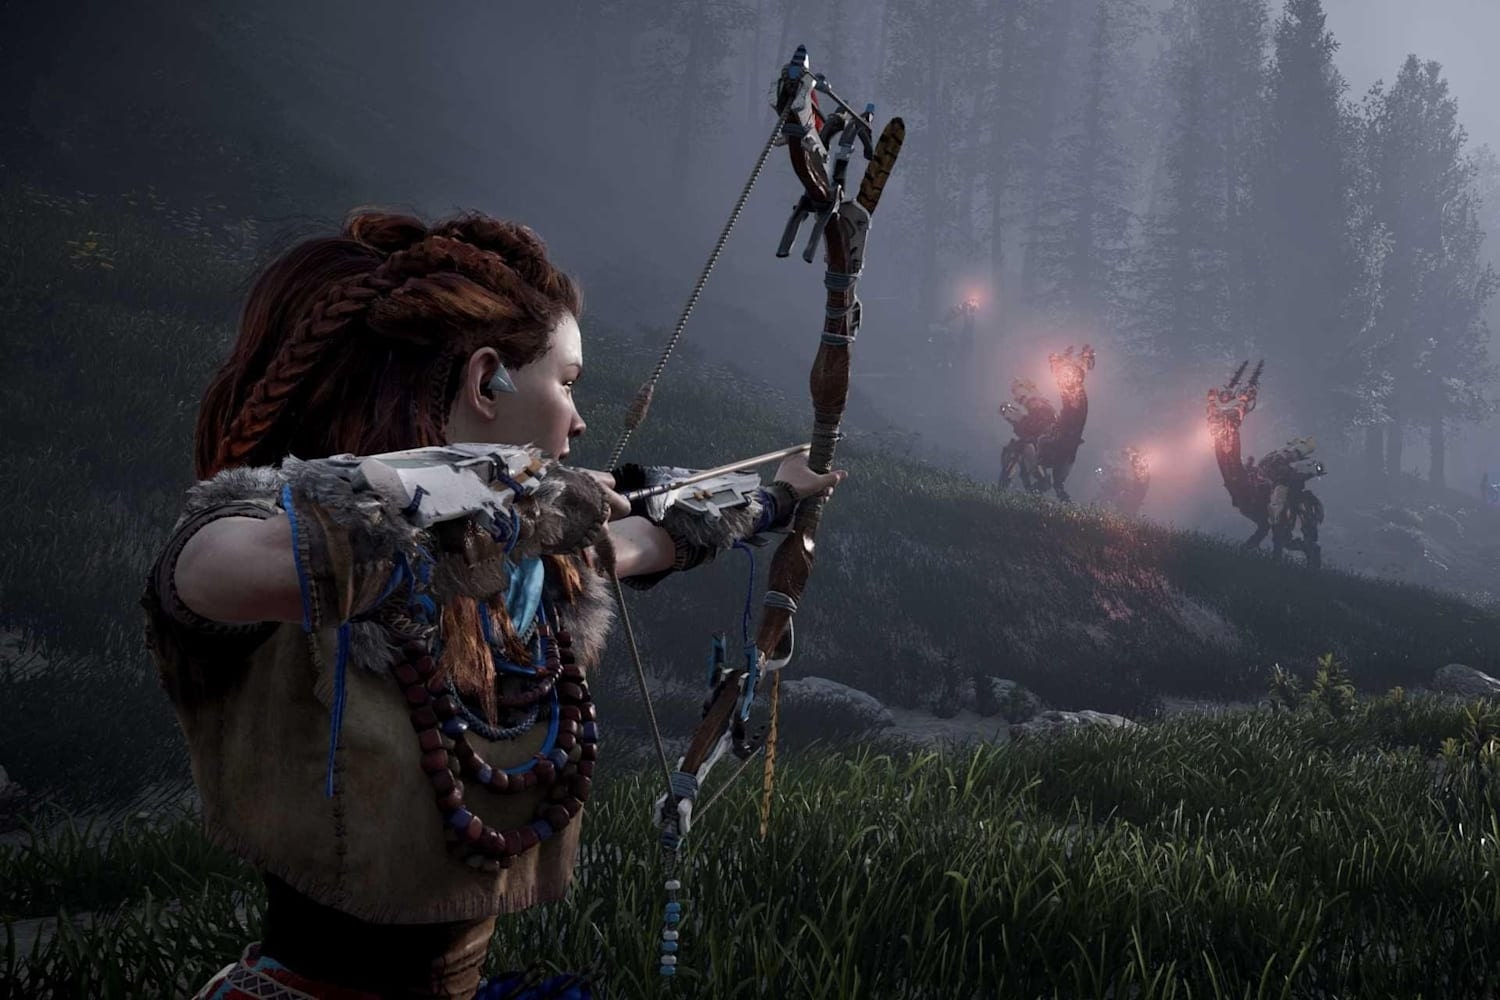 Aloy attacking grazers with a basic bow